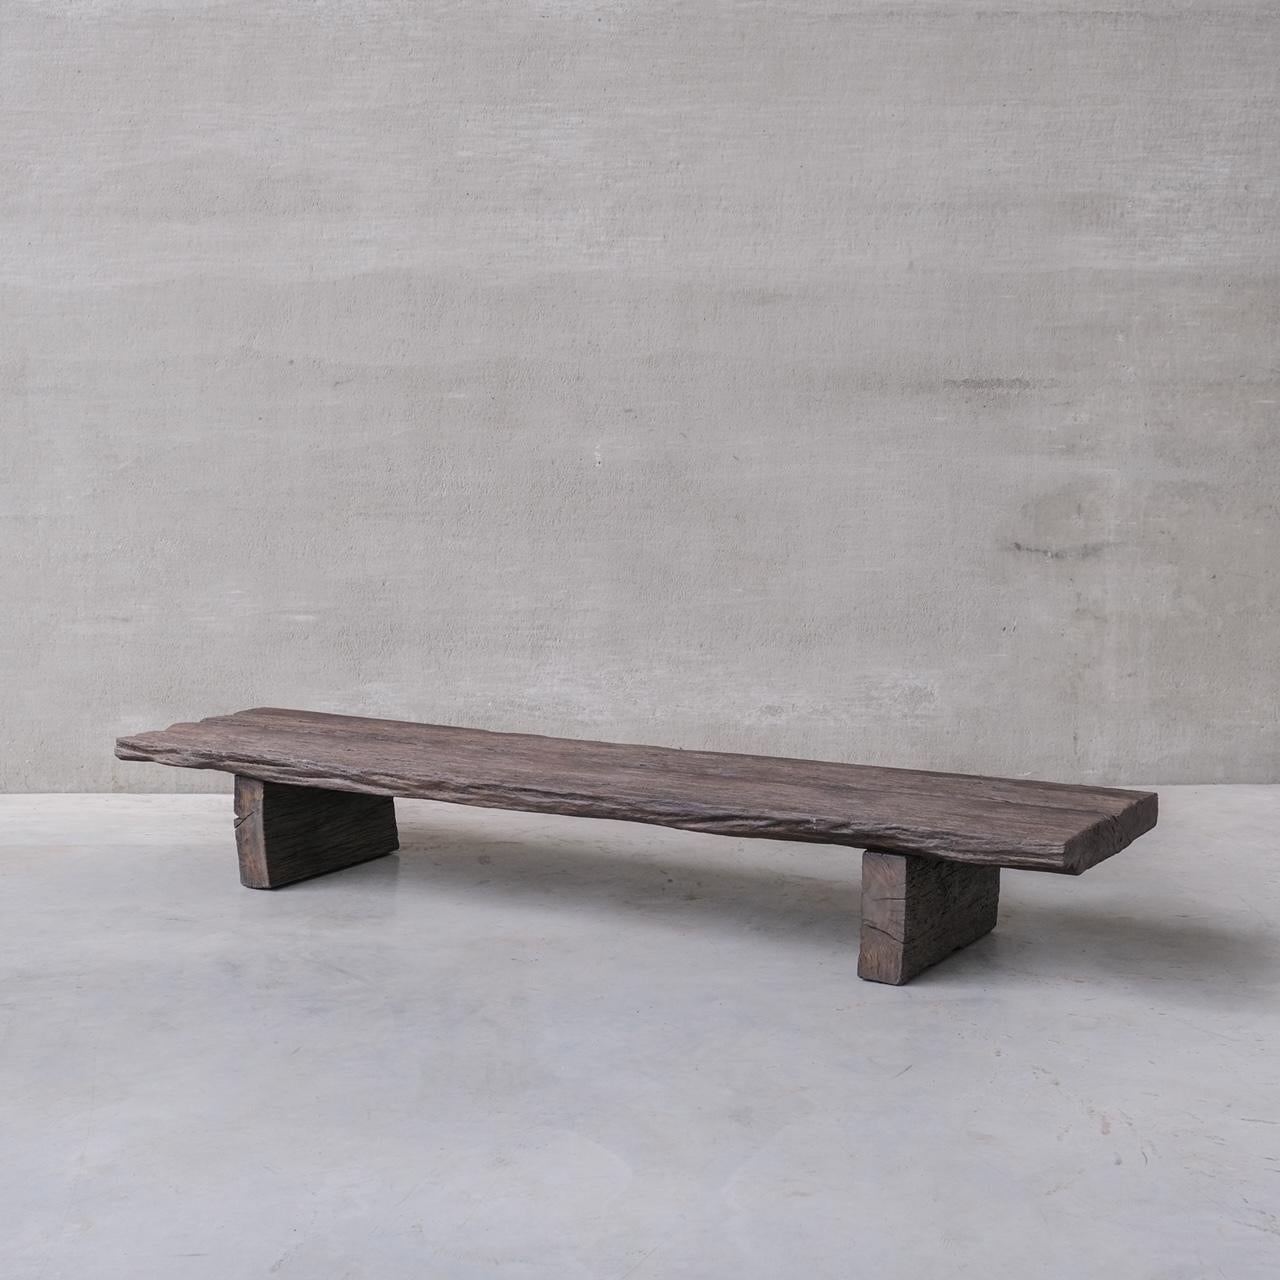 A long low coffee table. 

France, c1930s. 

Formed from antique wood into a new proposition. 

Undulating natural wooden surface in wabi sabi style. 

Stained finish. 

Internal reference: 12/9/23/015

Location: Belgium Gallery. 

Dimensions: 33.5